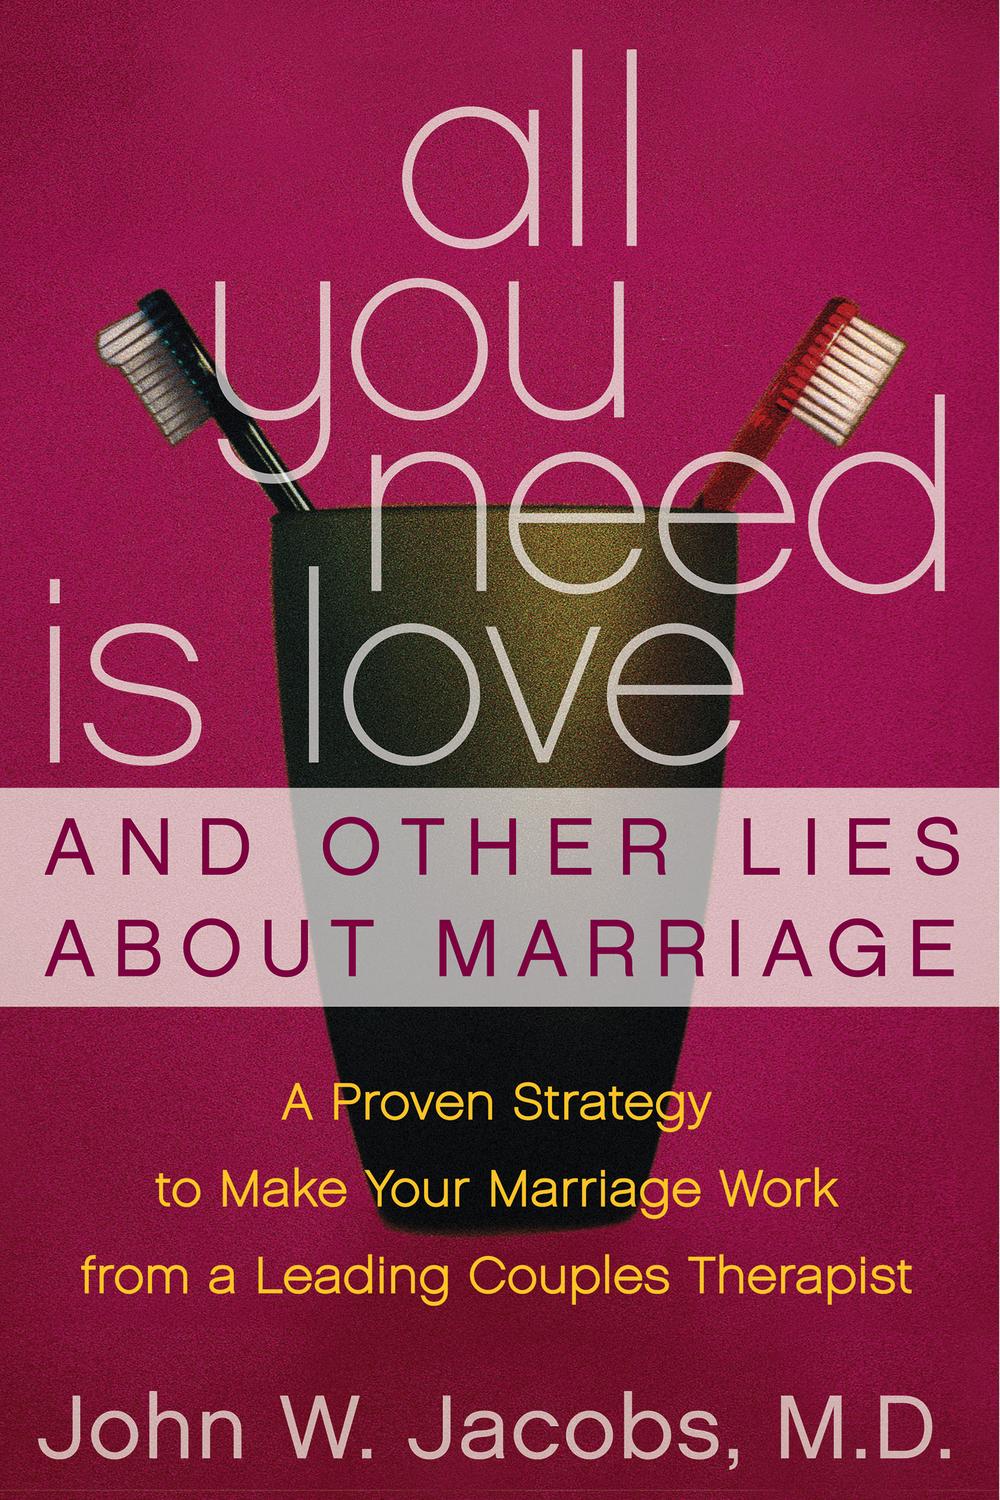 All You Need Is Love and Other Lies About Marriage - John W. Jacobs, M. D.